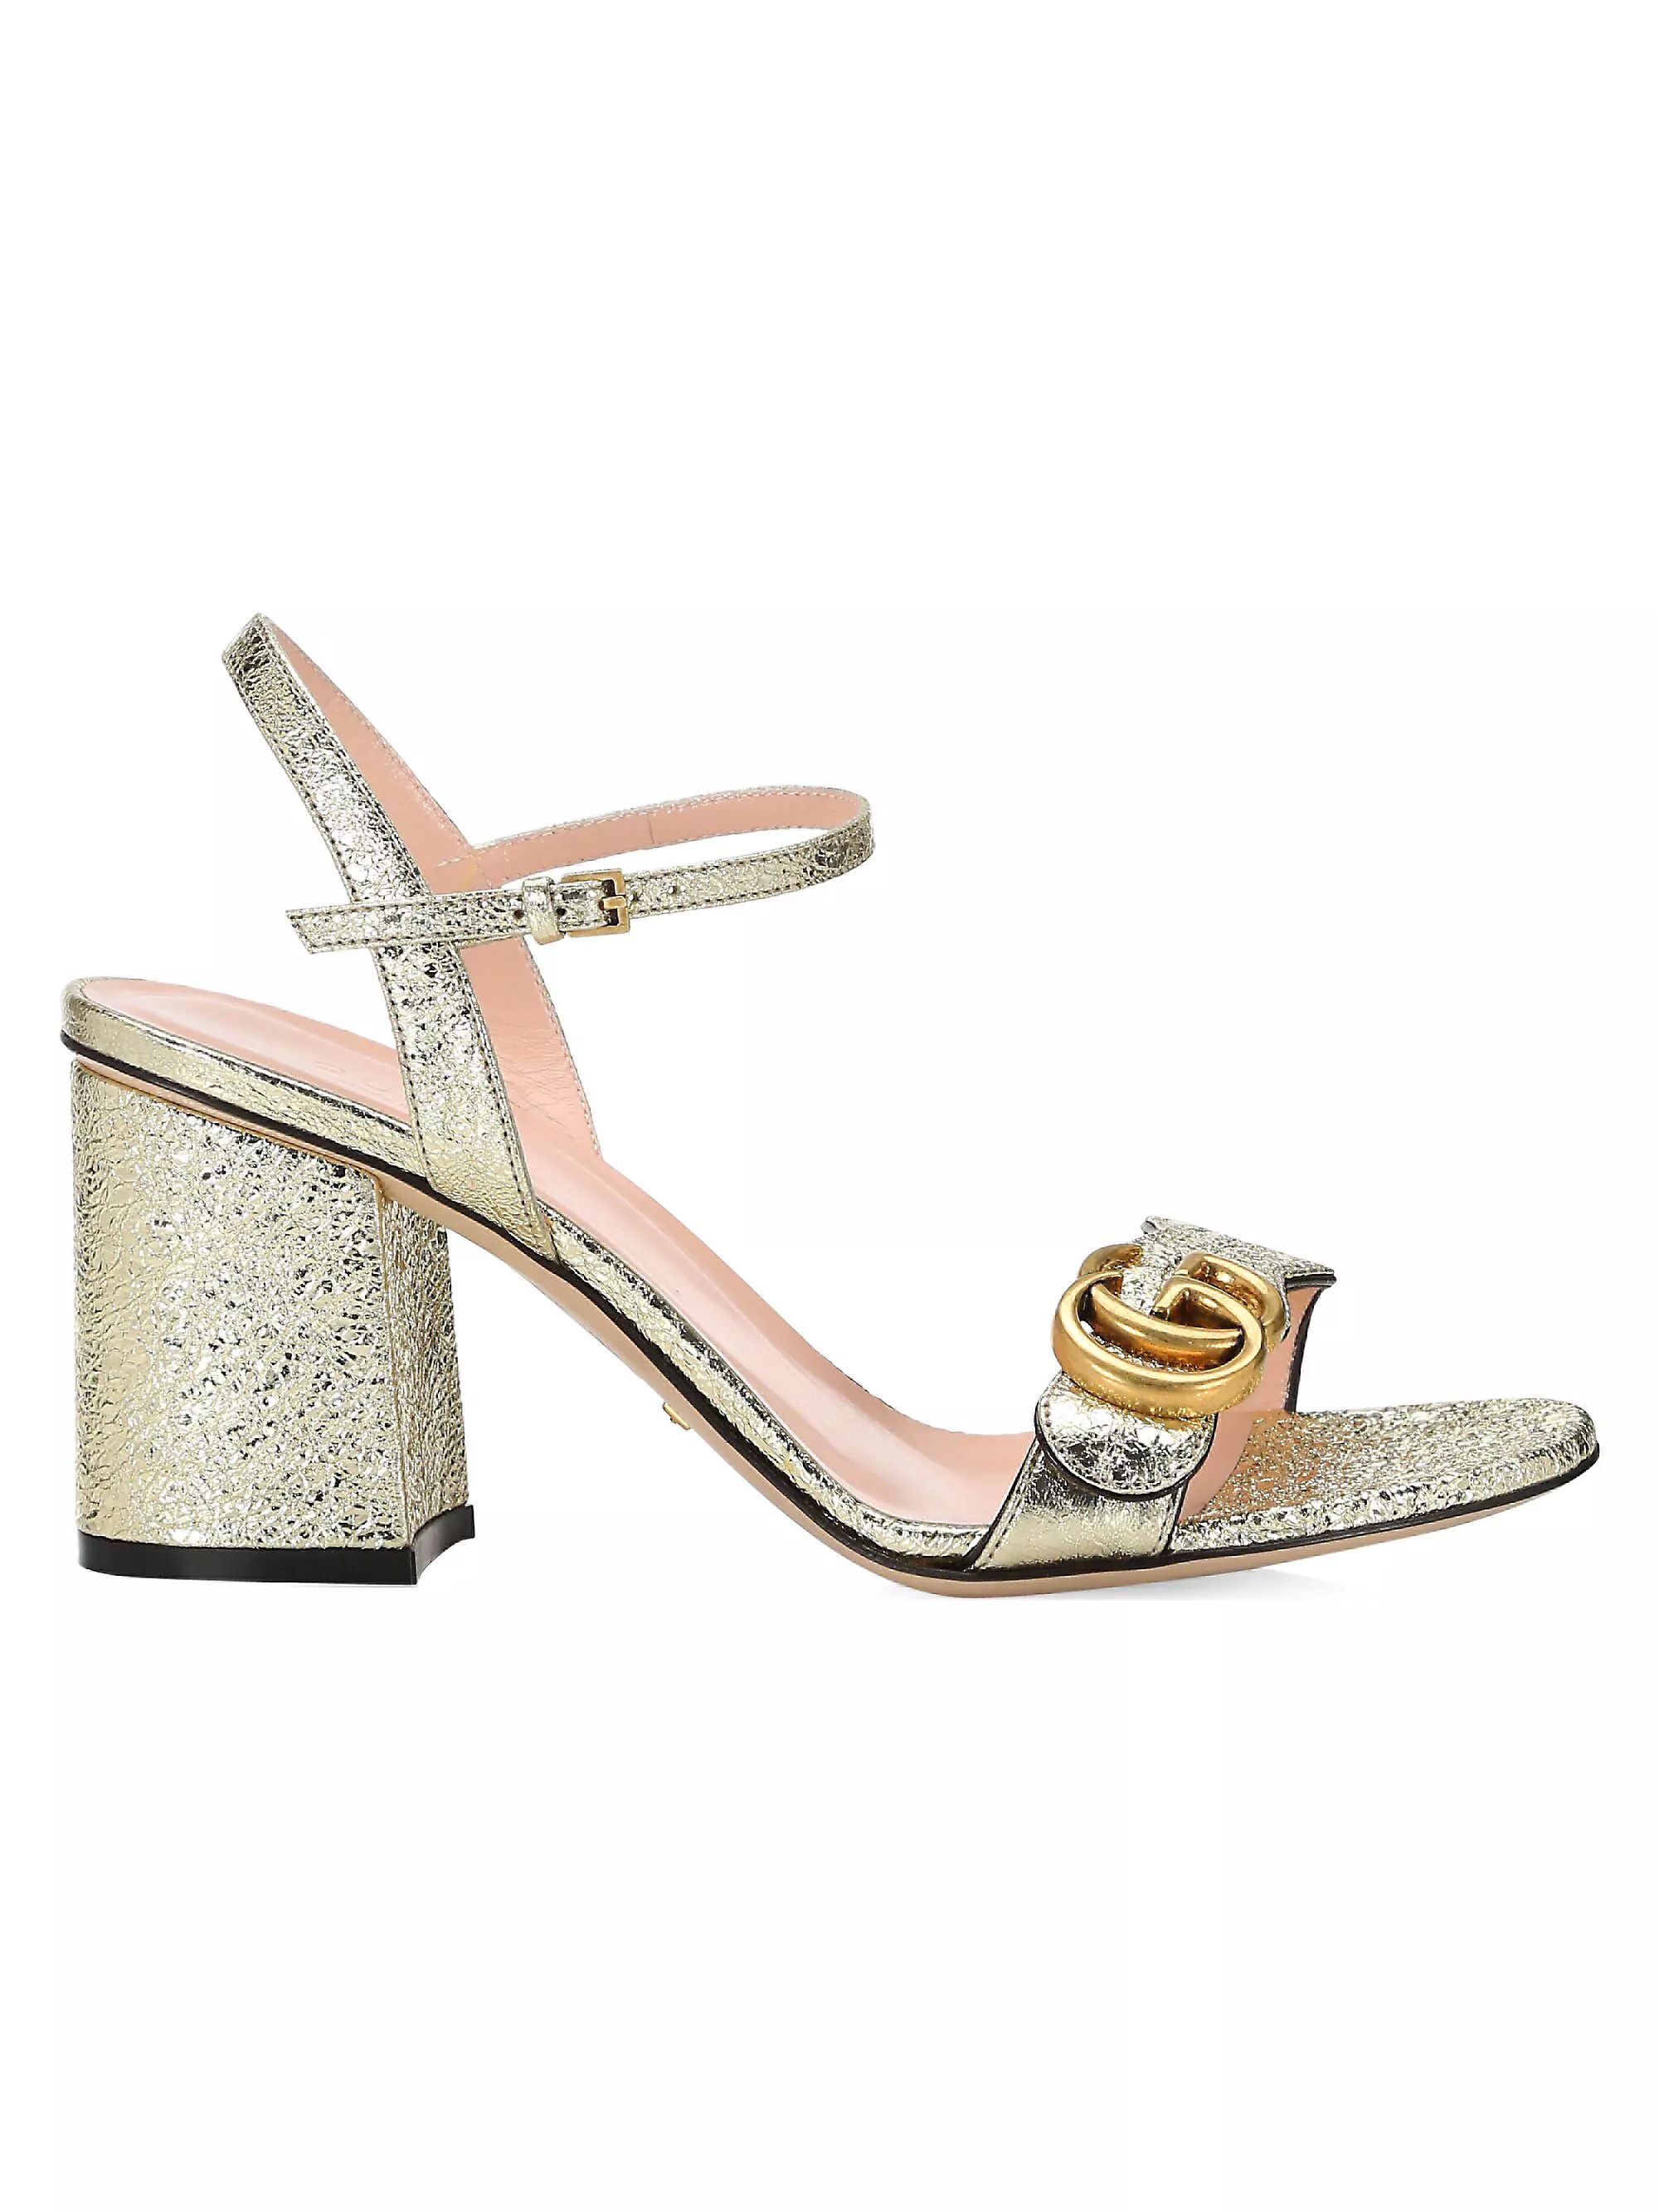 Marmont GG Ankle-Strap Sandals | Saks Fifth Avenue